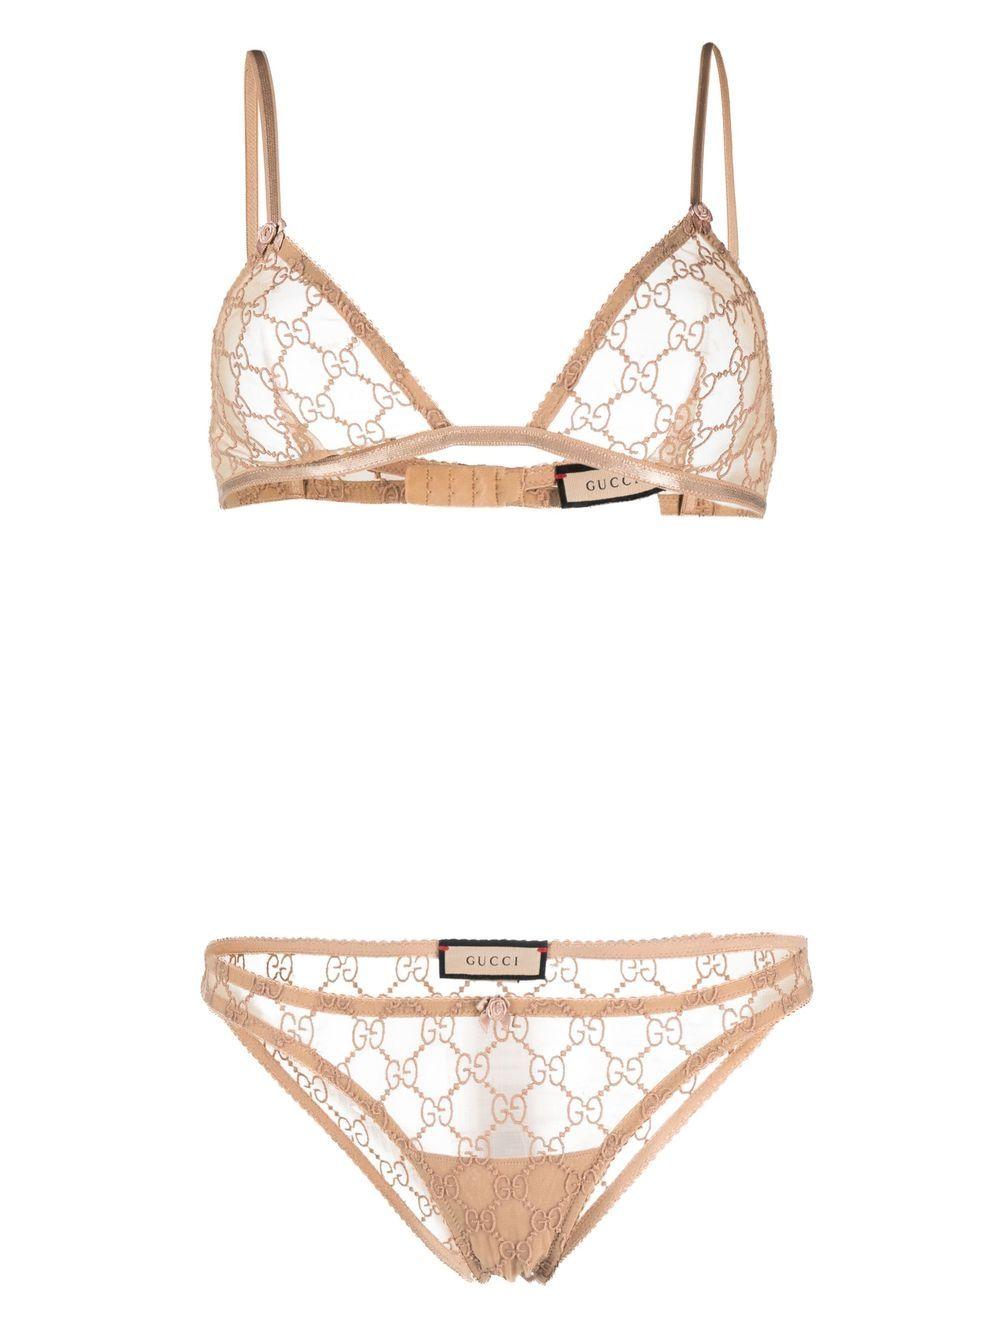 Gucci Gg Lingerie Set in Natural | Lyst